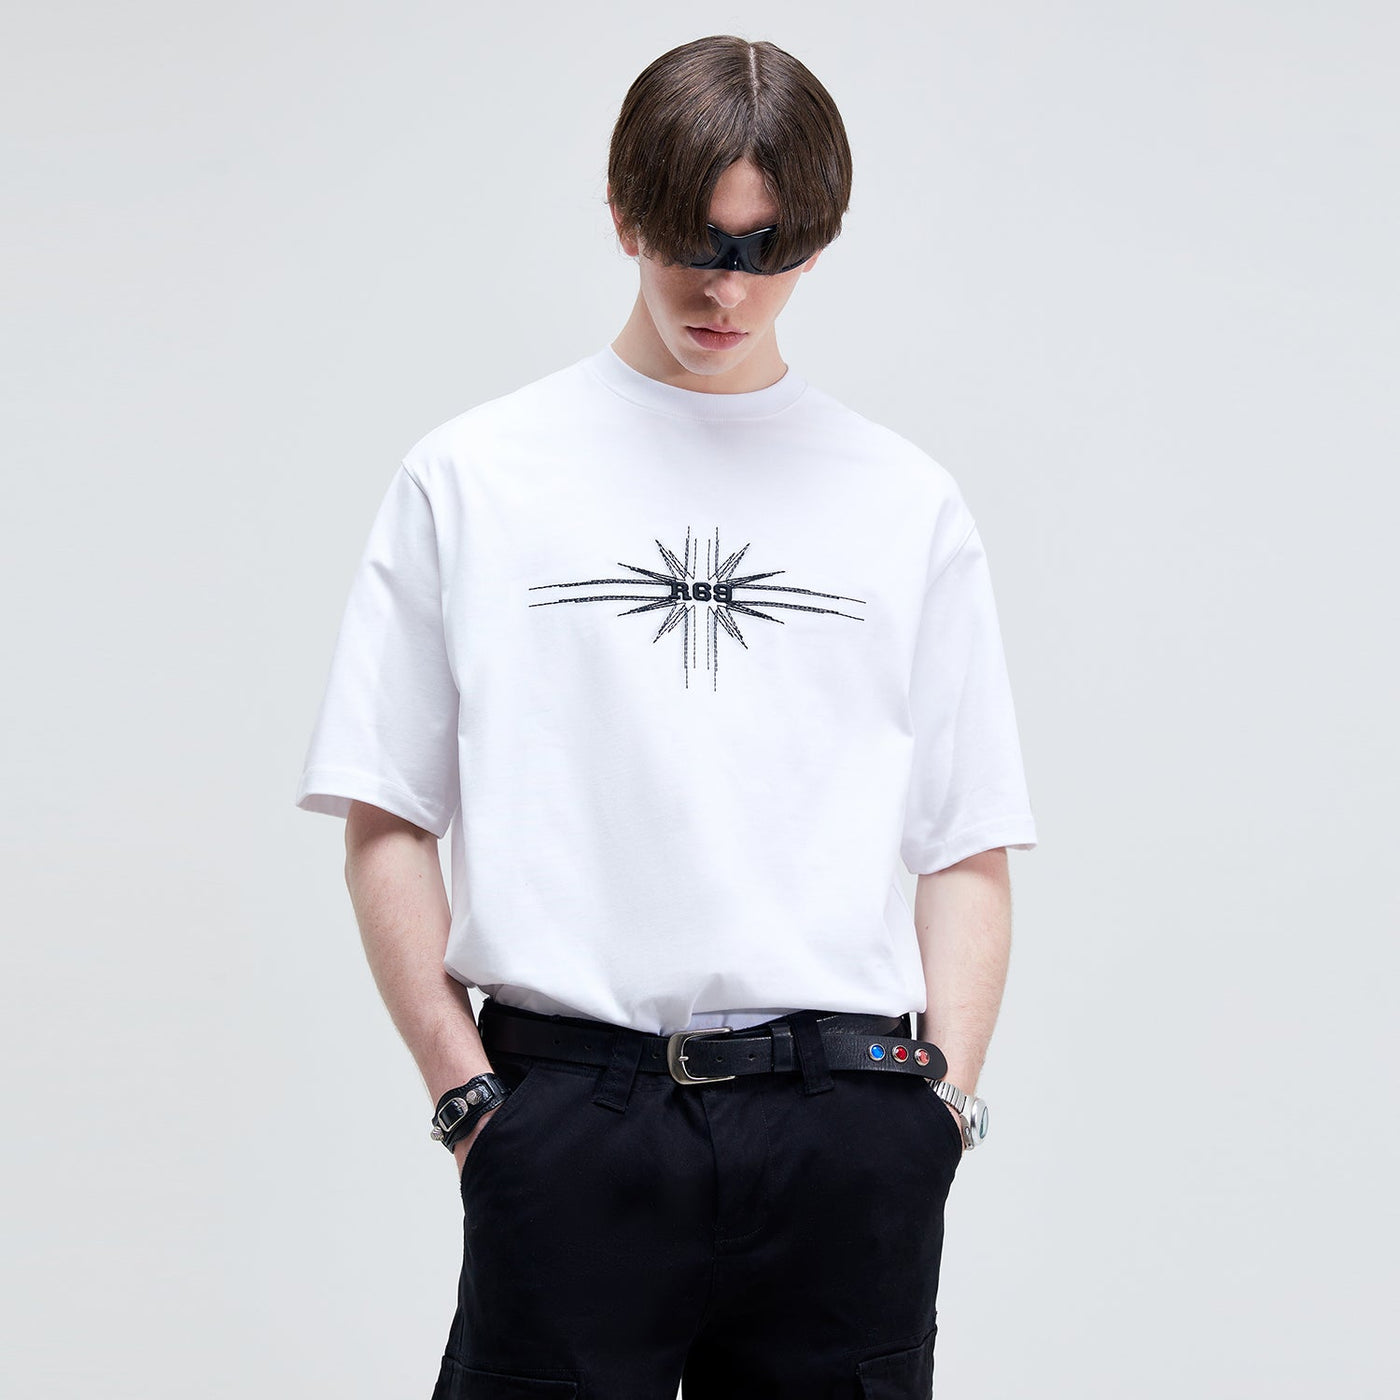 Logo Printed & Embroidered T-Shirt Korean Street Fashion T-Shirt By R69 Shop Online at OH Vault